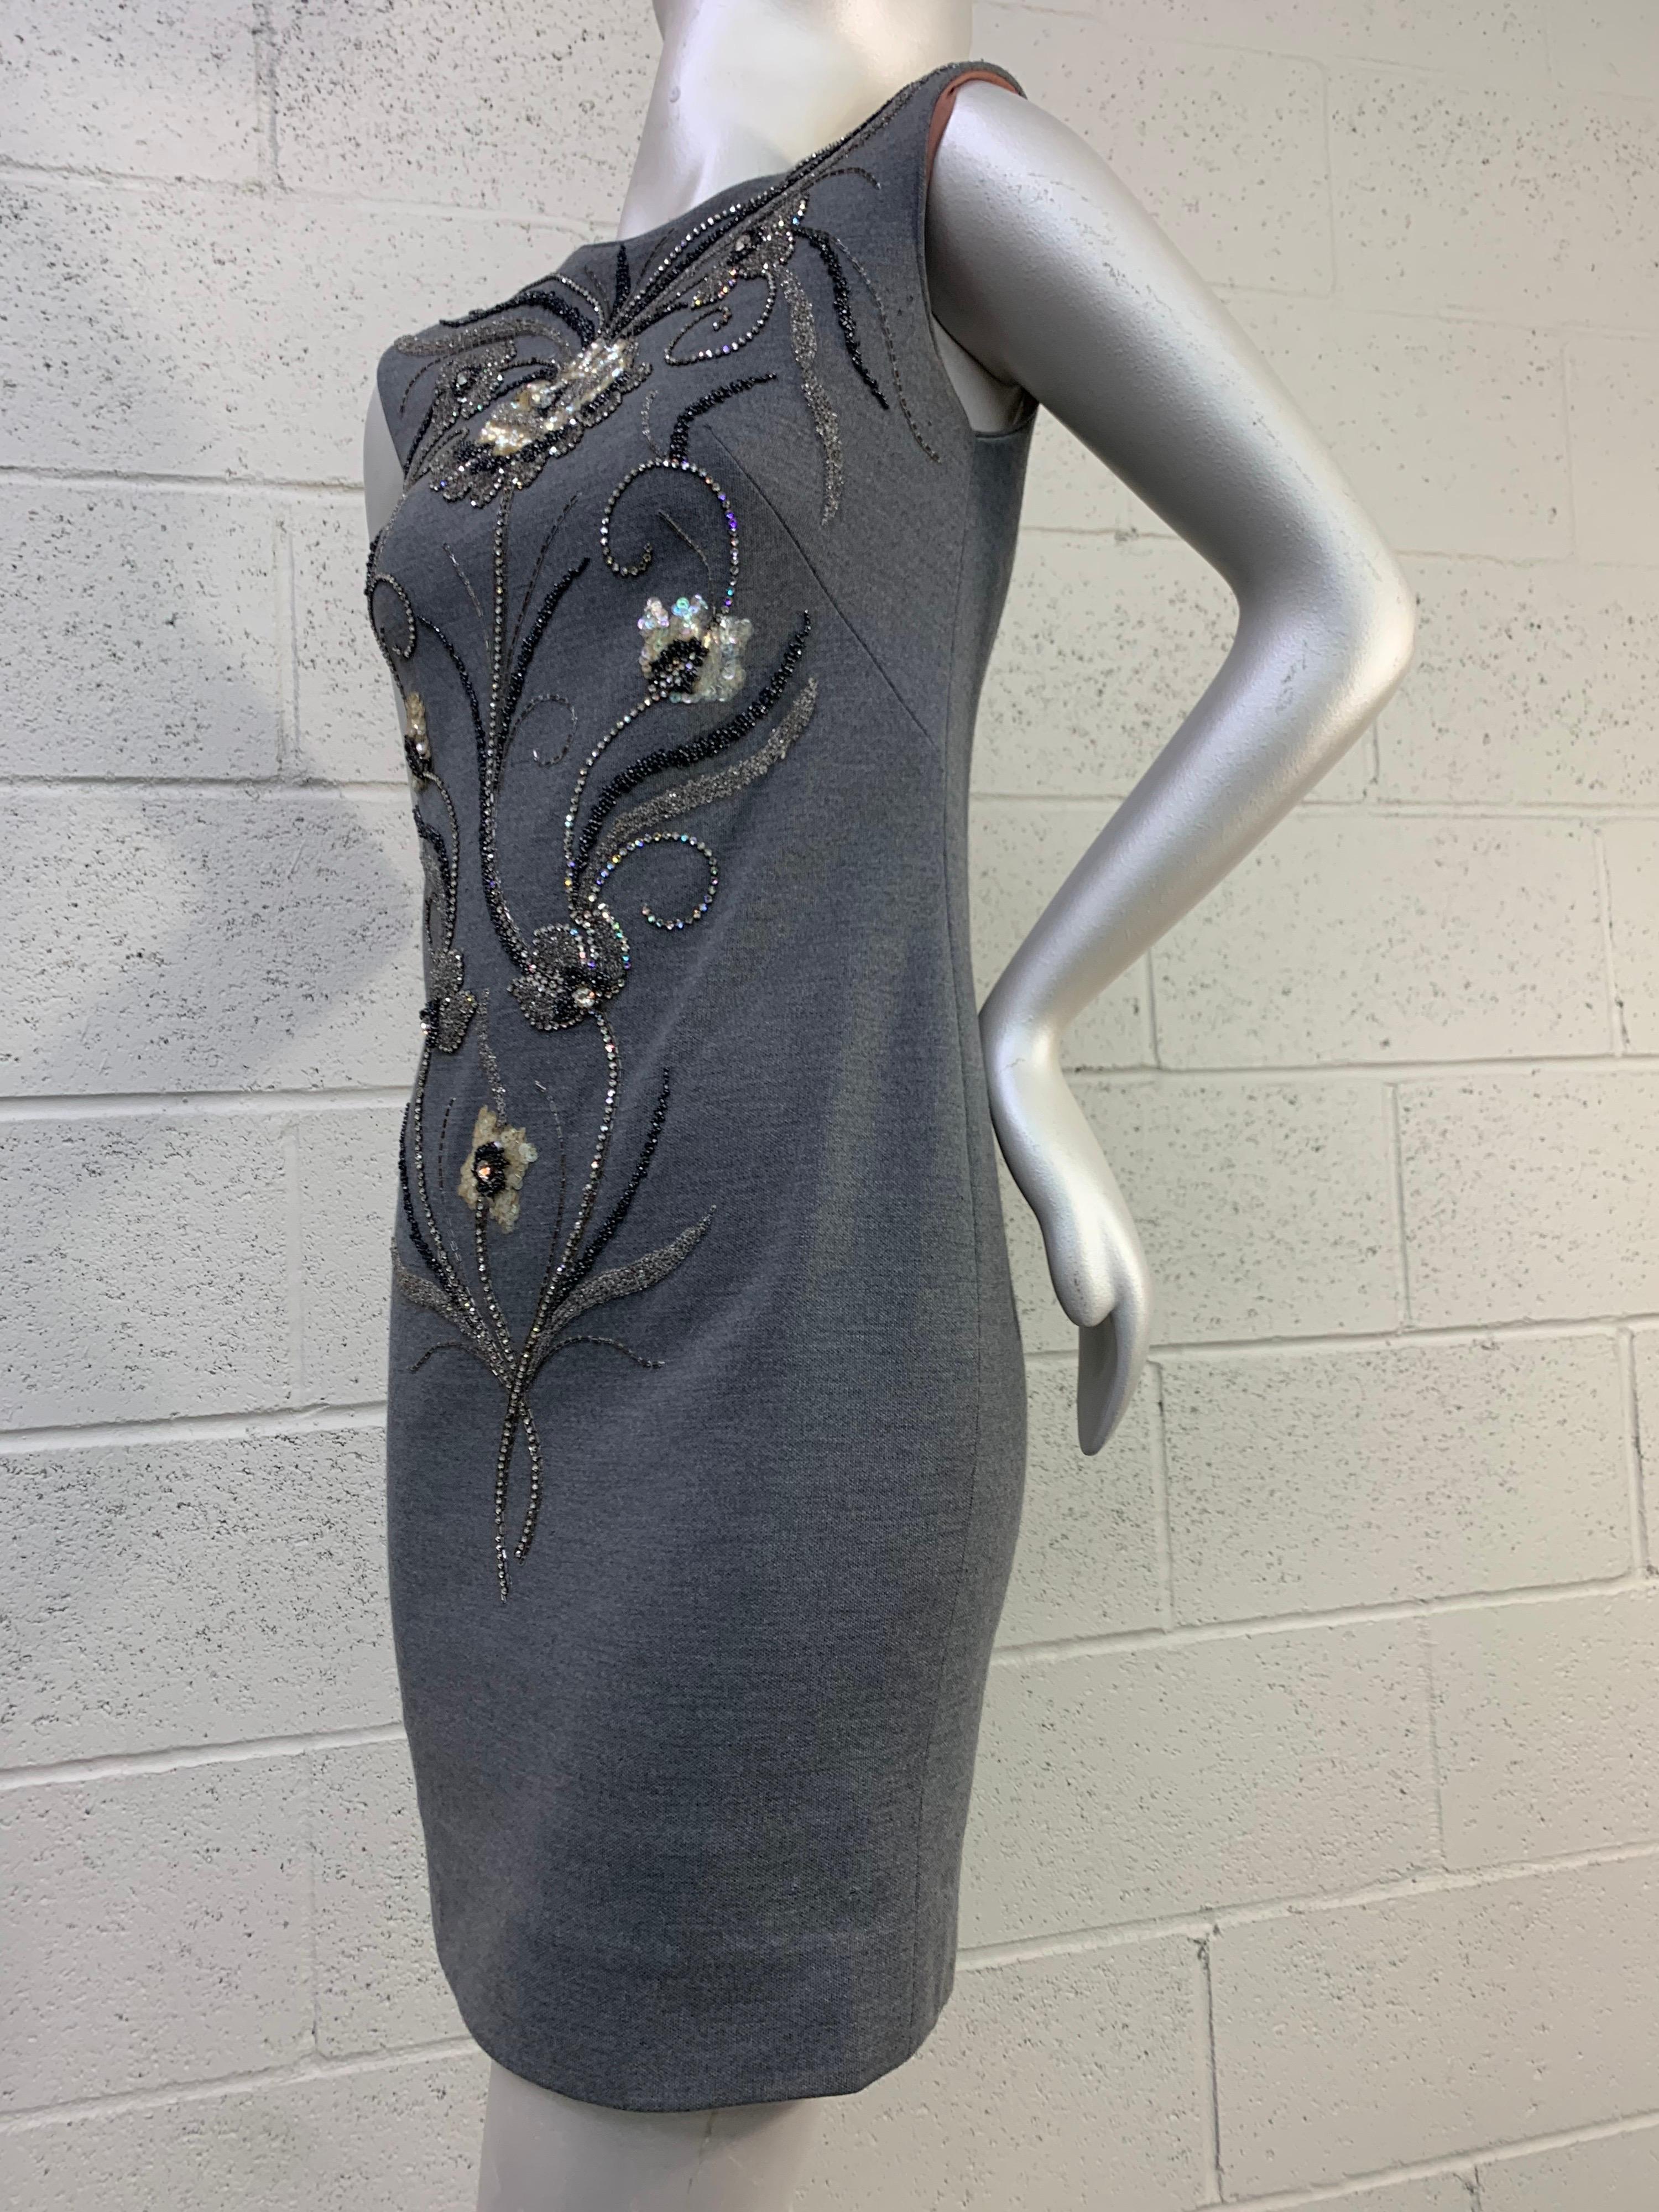 1960s Mr. Blackwell Gray Wool Knit Mini Dress w/ Fabulous Metallic Jewel Florals In Excellent Condition For Sale In Gresham, OR